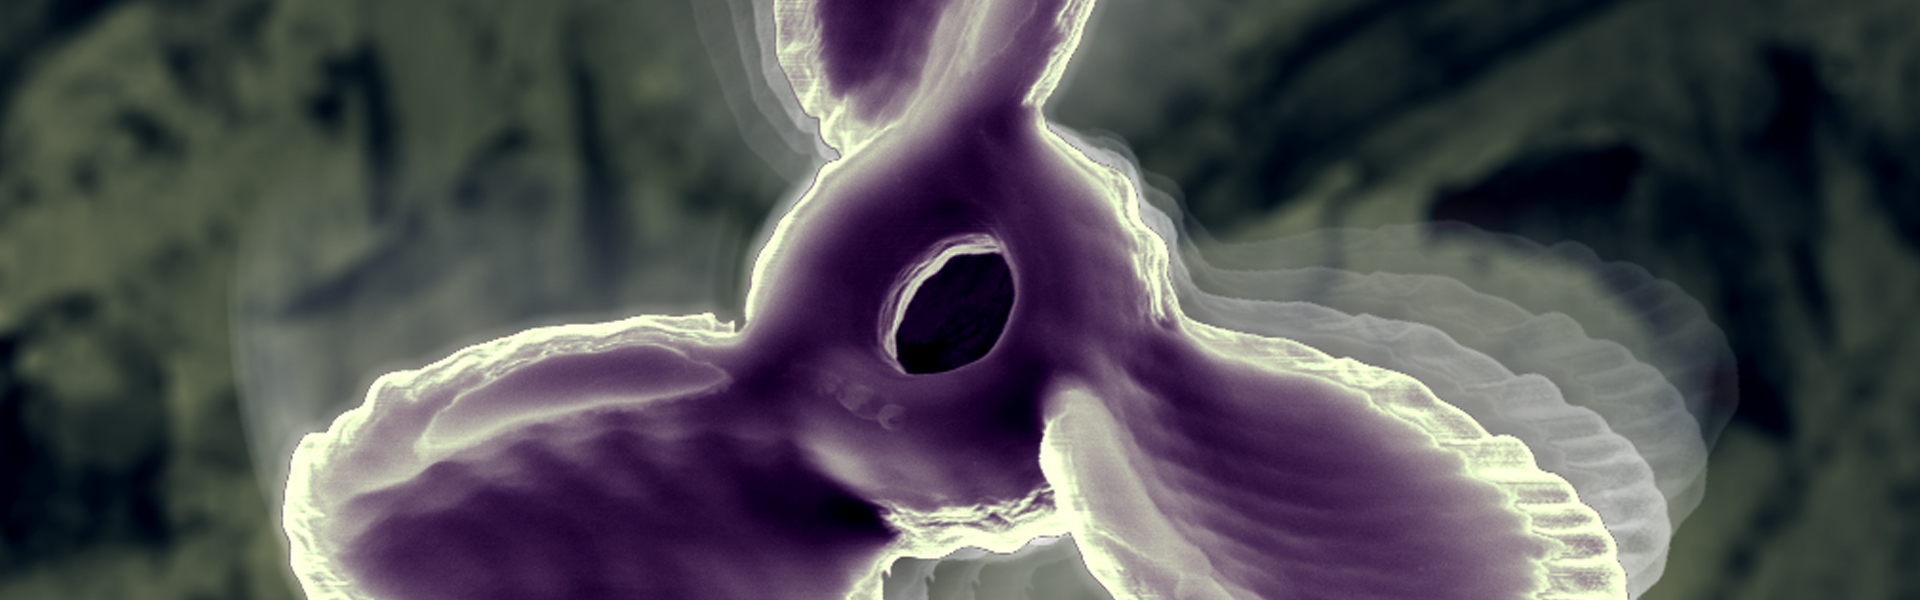 A SEM image depicting a 3-D printed self-propelled micropropeller. These micropropellers are 7 µm from tip-to-tip and swim auton